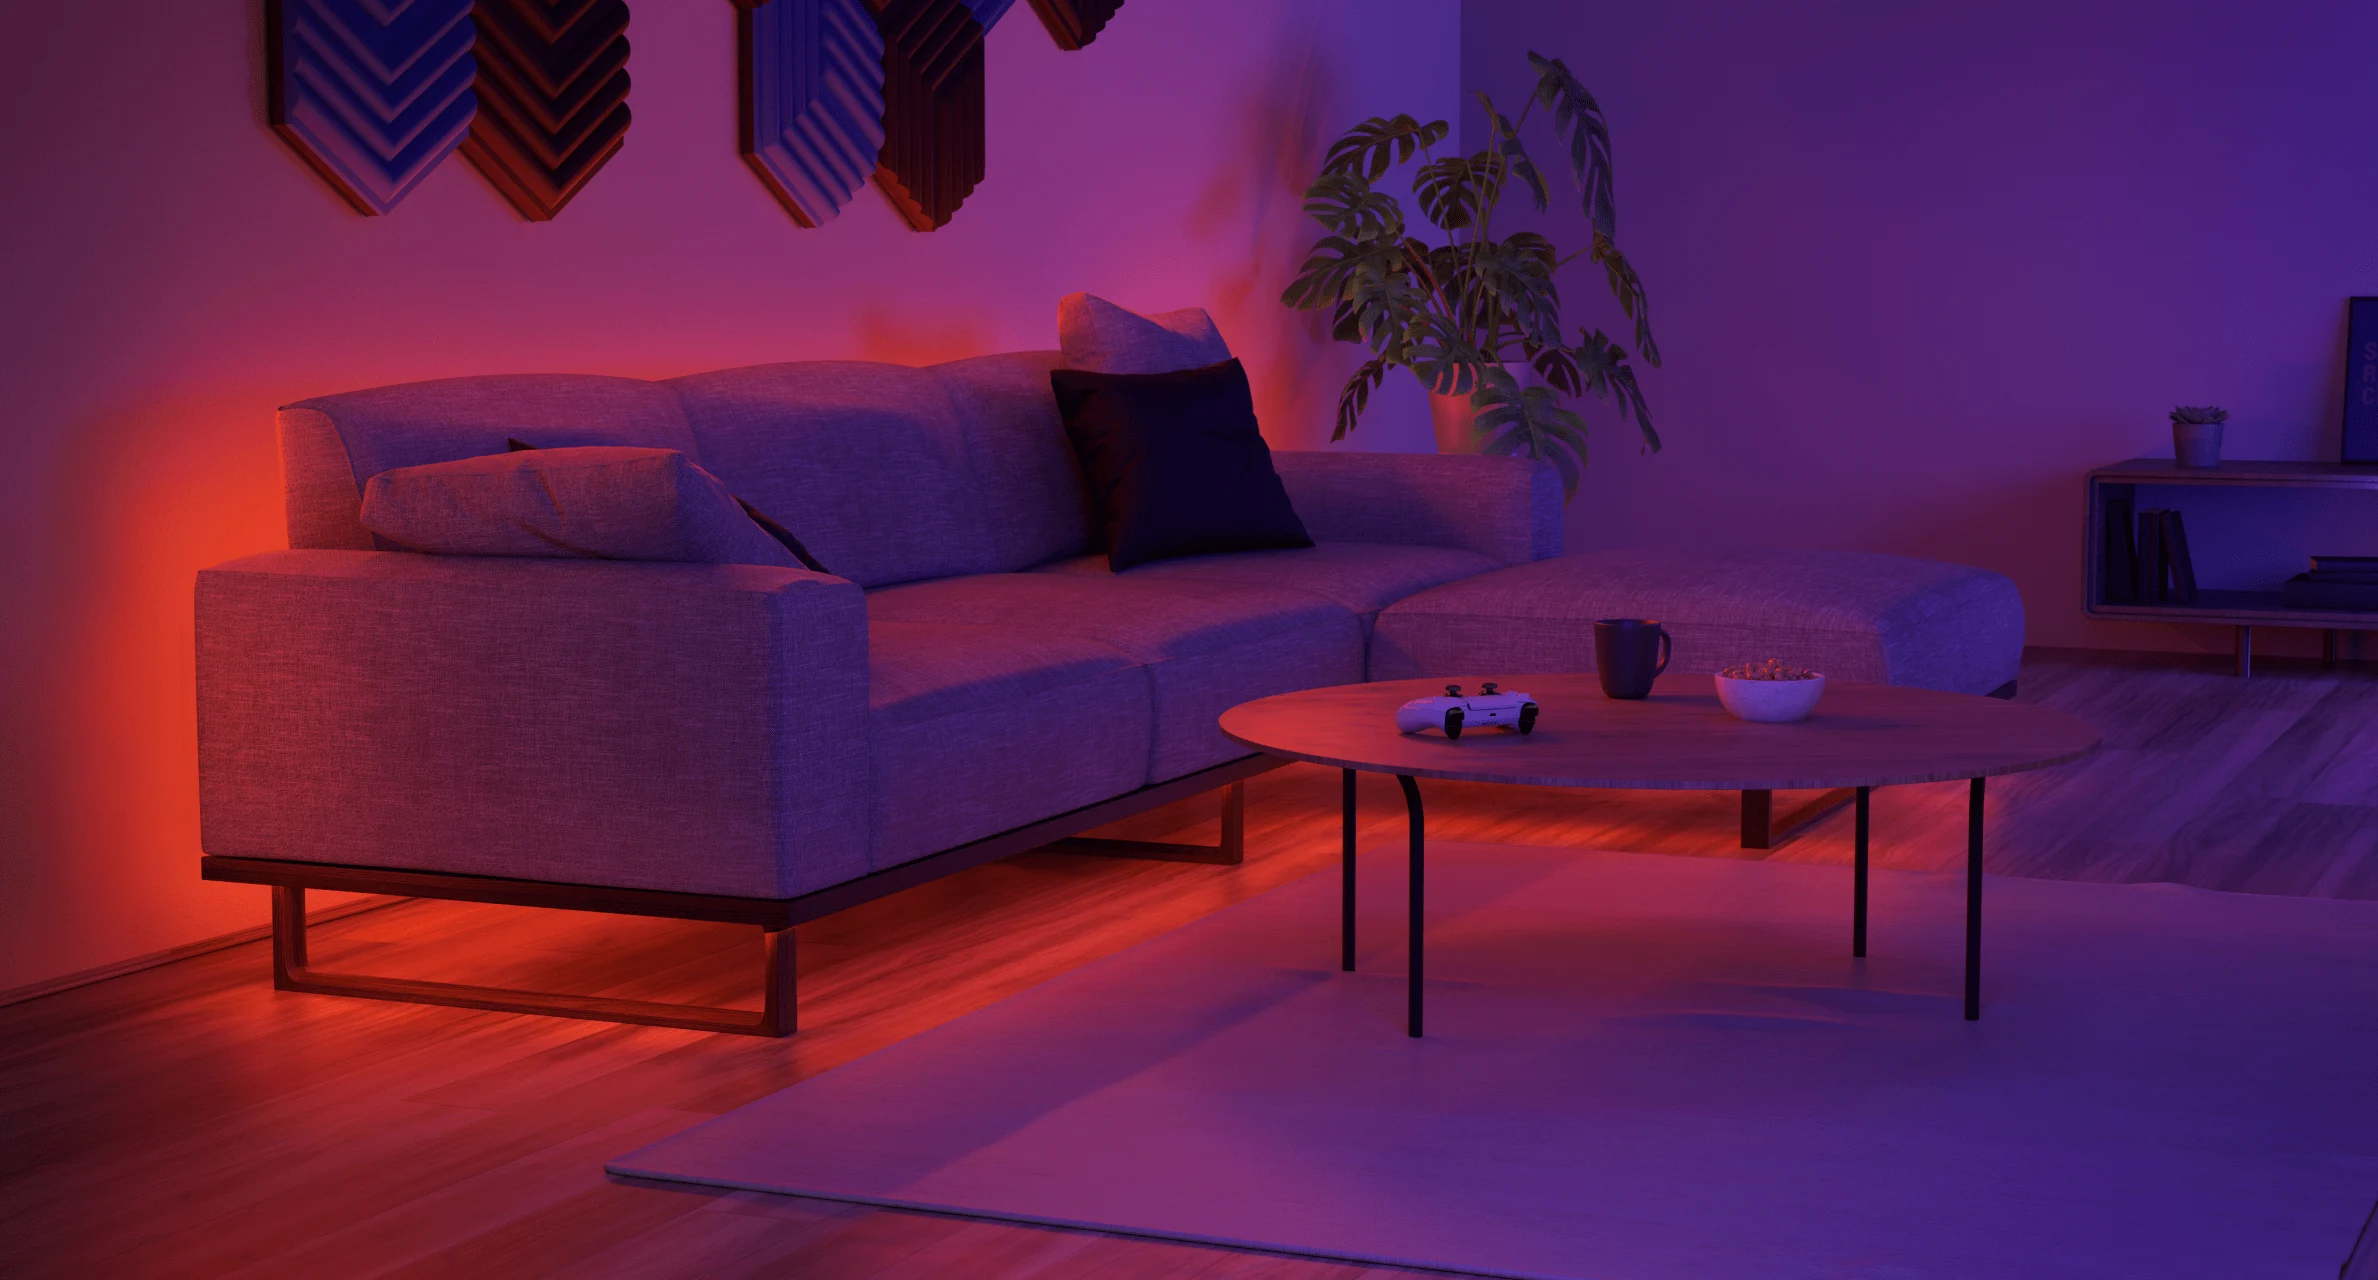 Light Strip used to illuminate a sofa with red lighting